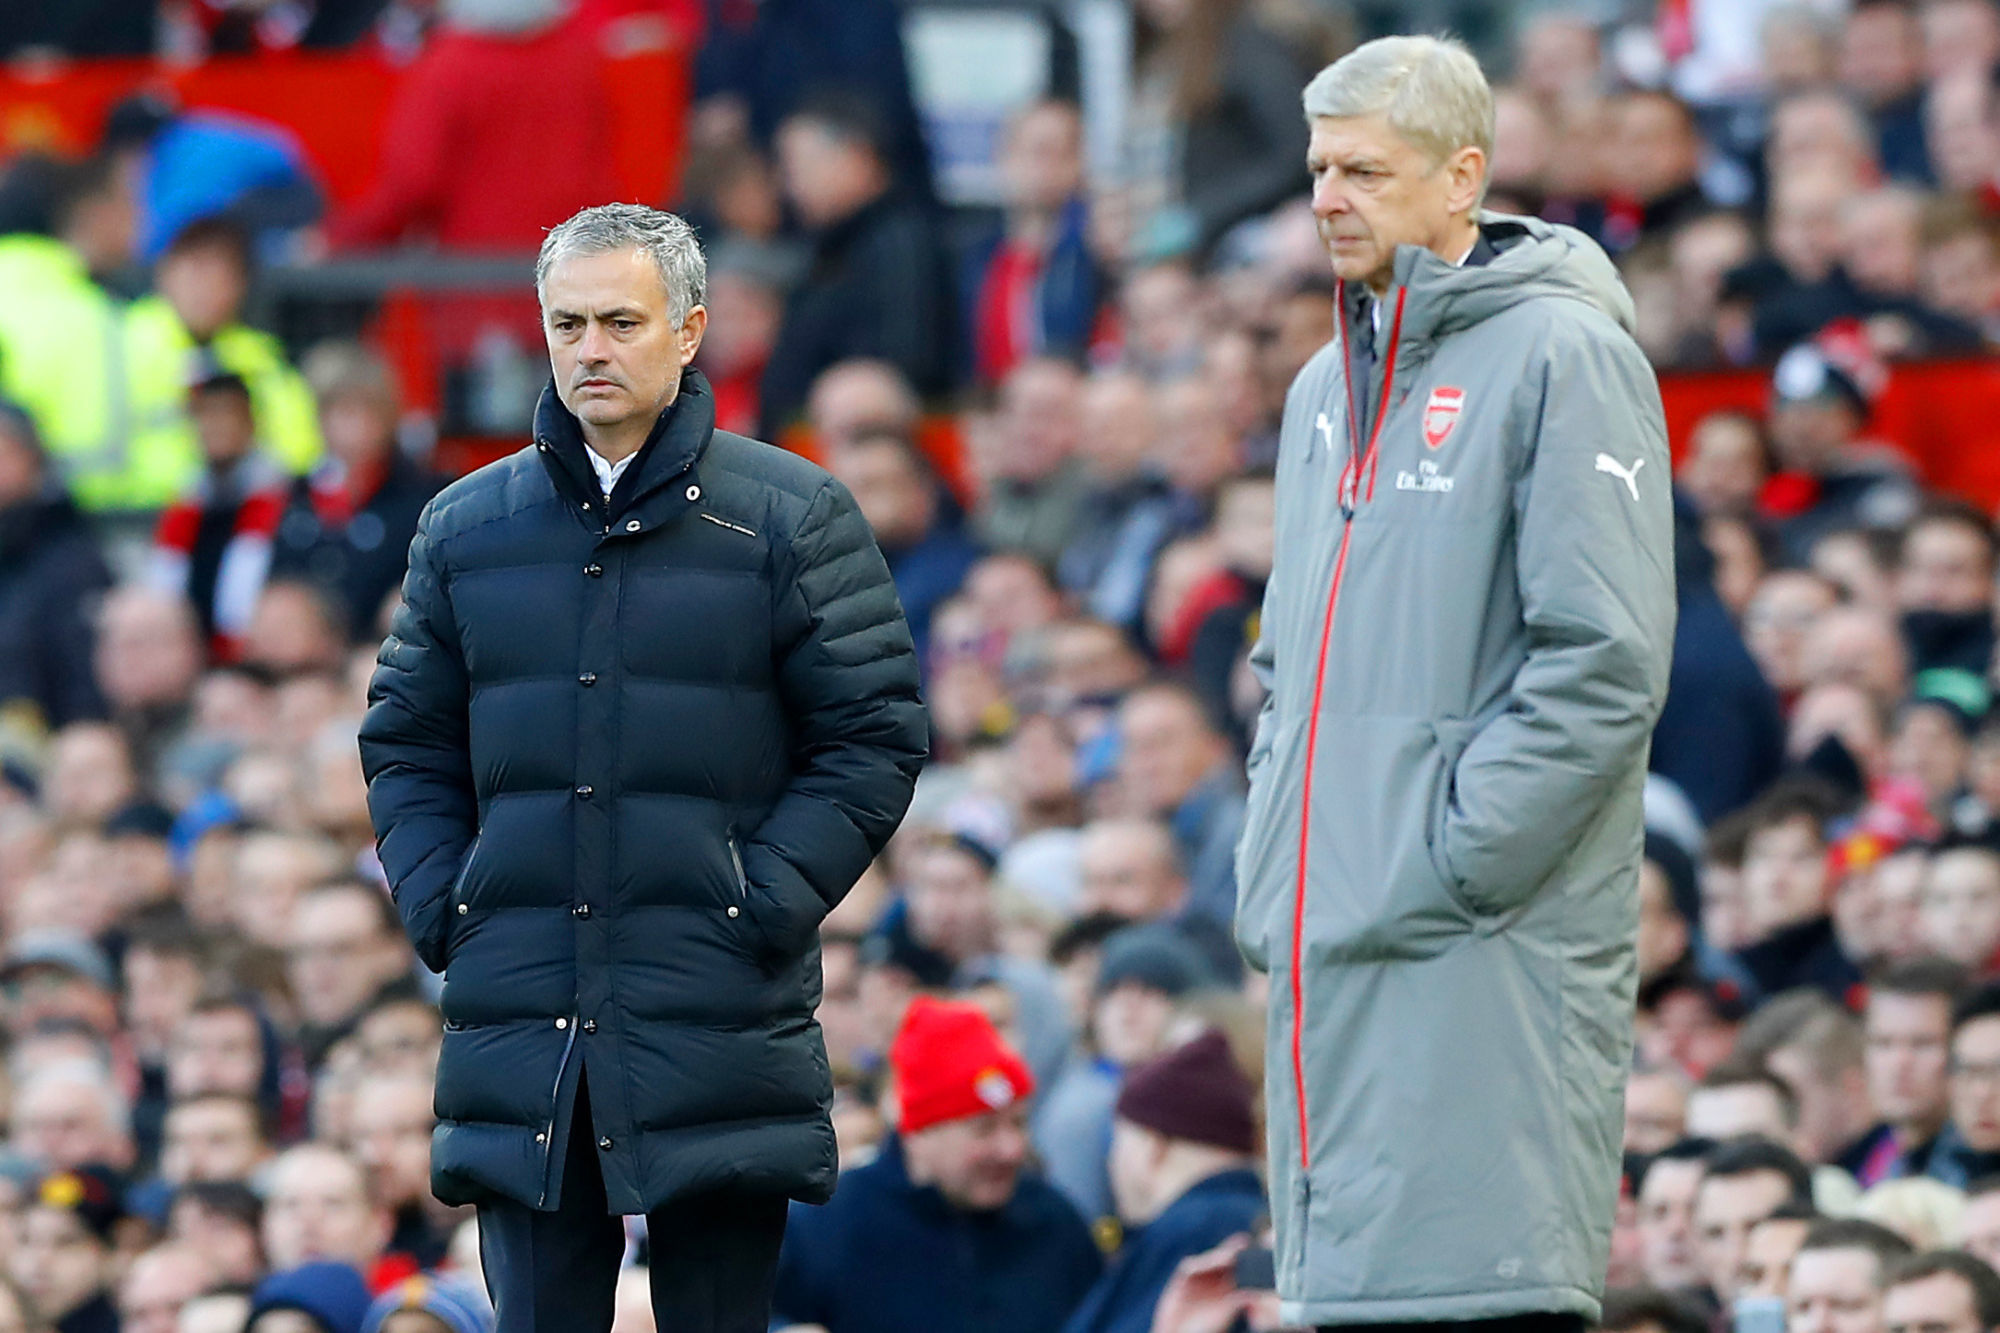 Manchester United manager Jose Mourinho (left) and Arsenal manager Arsene Wenger on the touchline during the Premier League Match between Manchester United and Arsenal at Old Trafford, Manchester on N